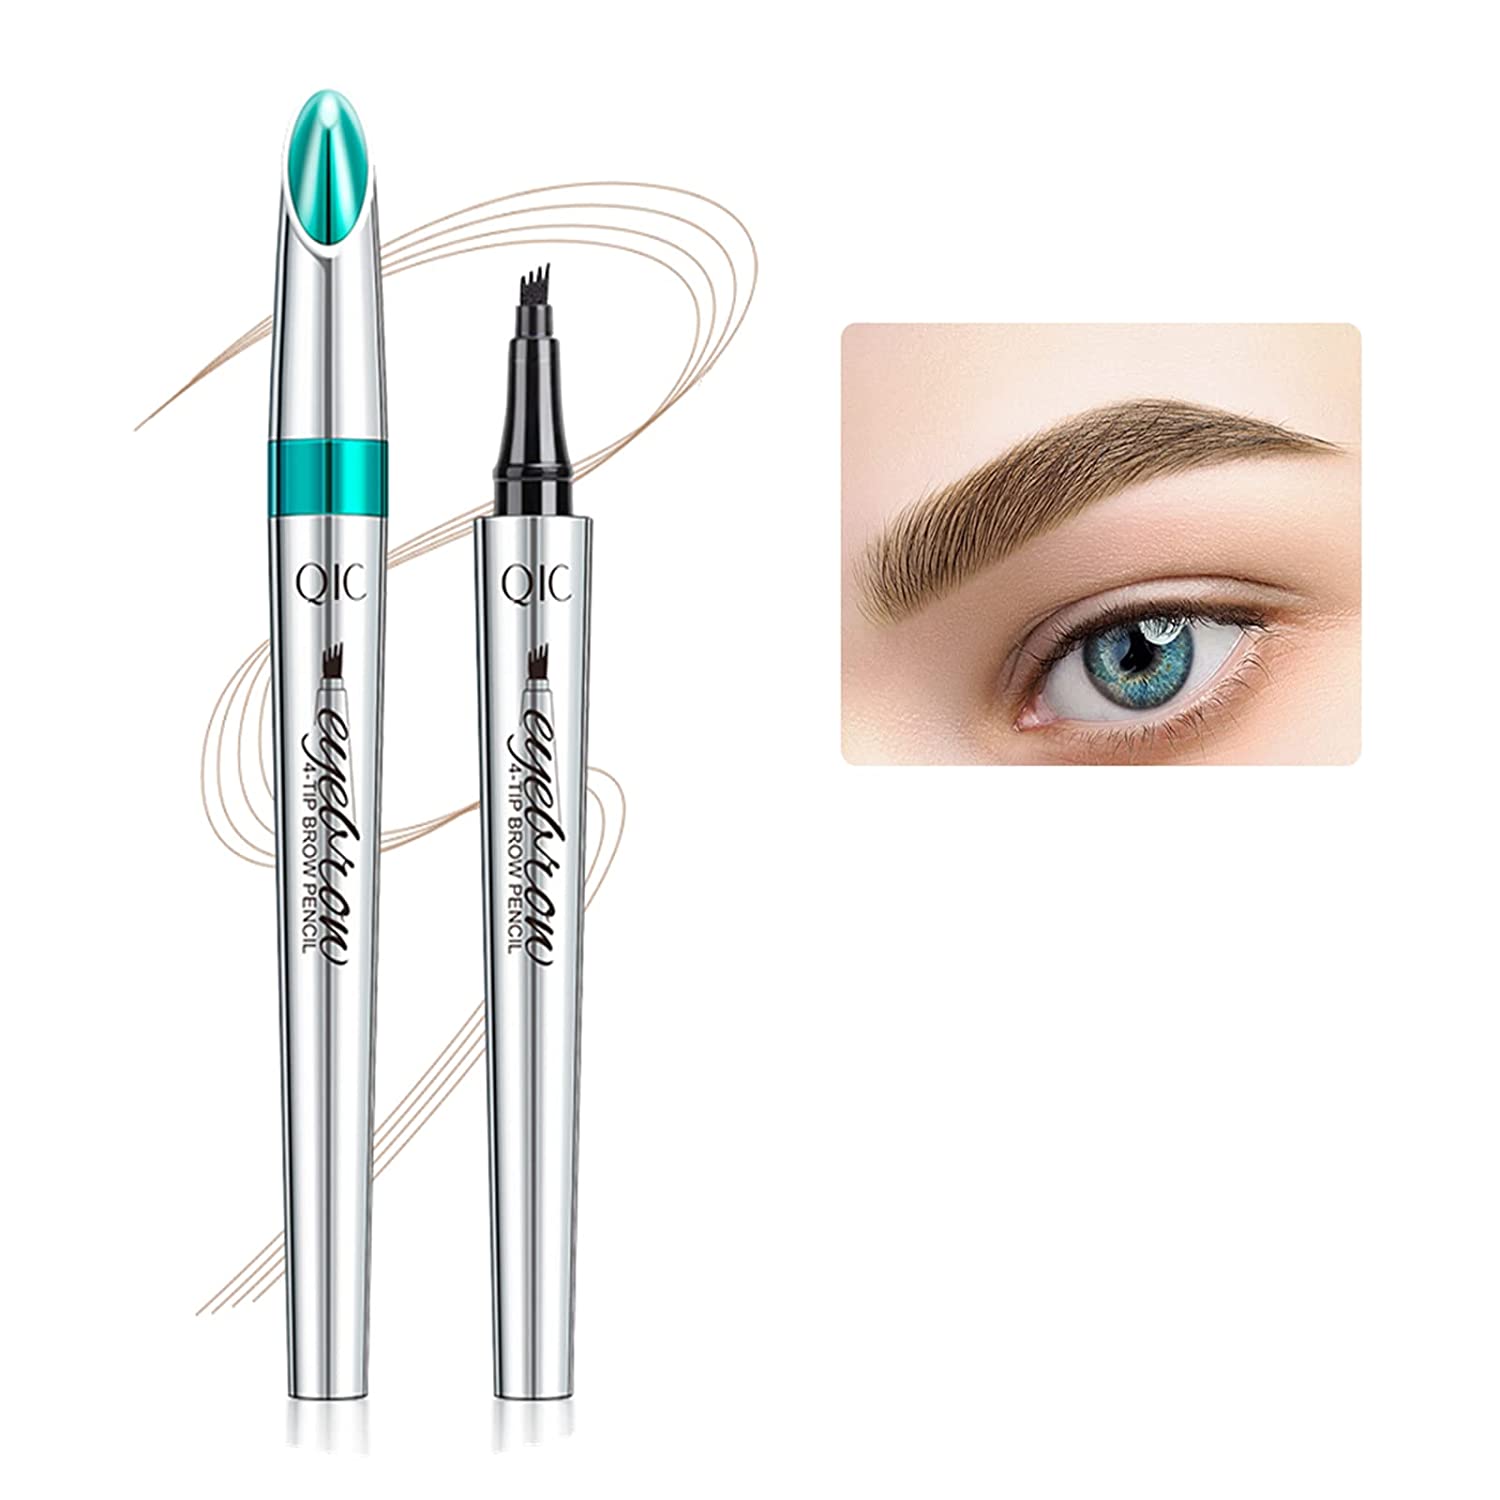 Waterproof Tattoo Eyebrow Pencil, Professional Makeup Eyebrow Pencil, Quick Drying and Durable Without Flowering (Light Brown)